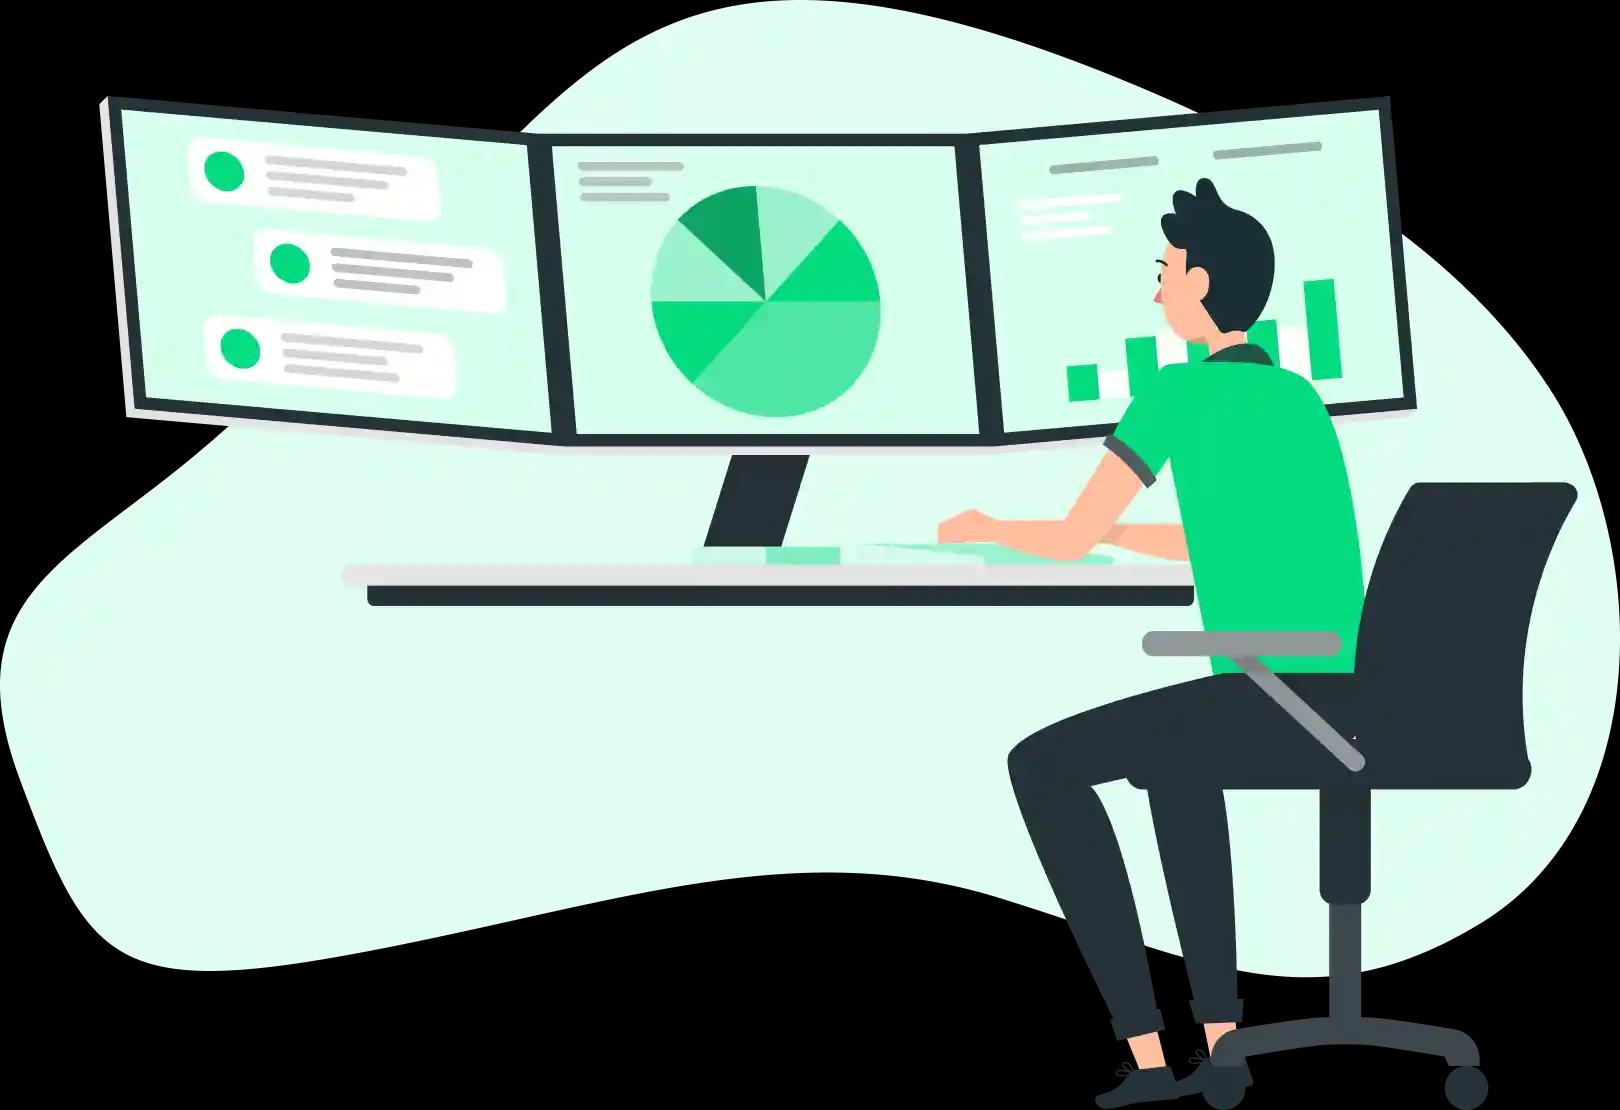 This image depicts a person in a green shirt seated at a workstation with multiple monitors, analysing a pie chart.